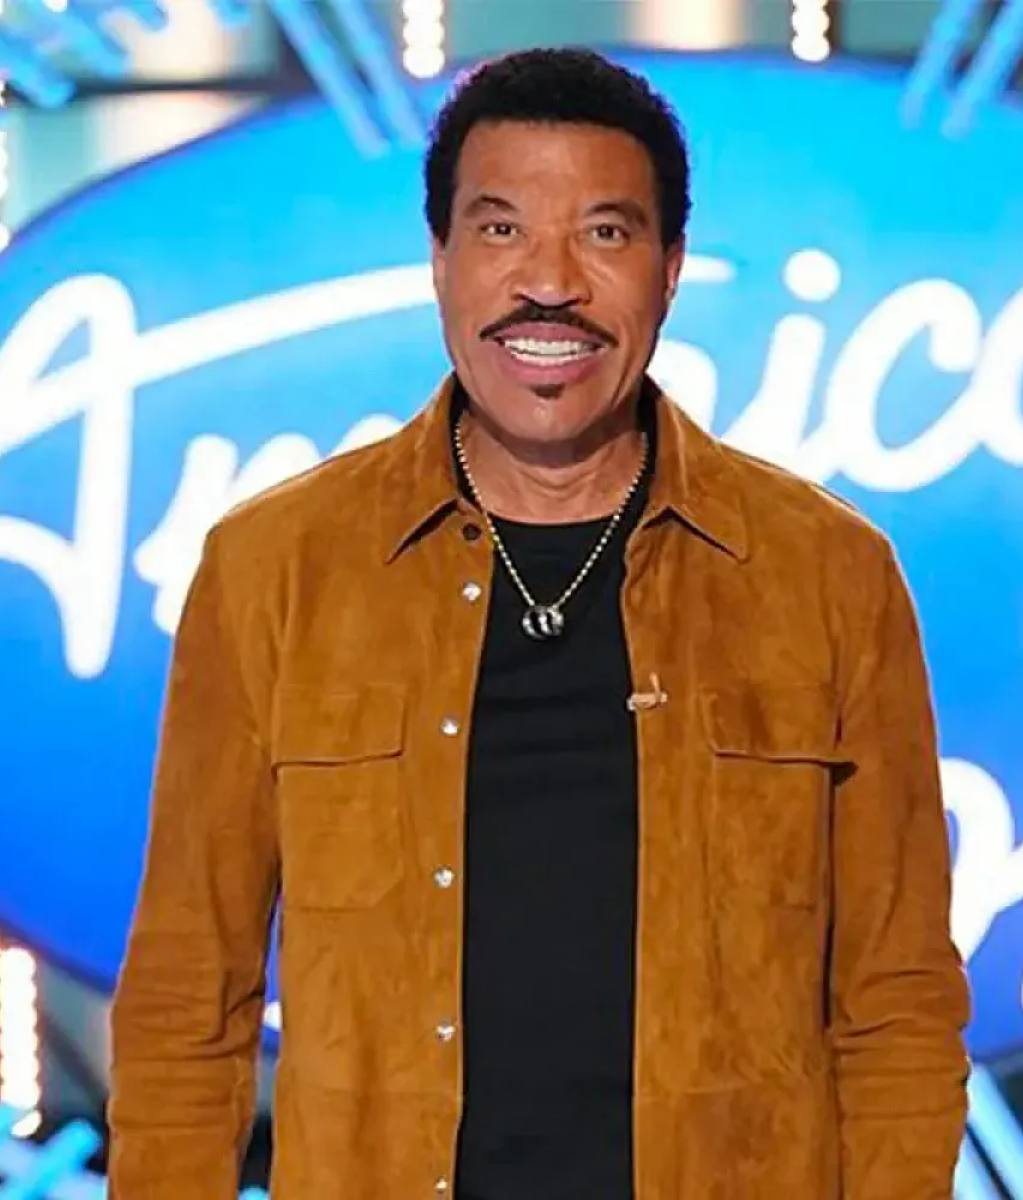 Lionel-Richie-MAY-01-American-Idol-Brown-Suede-Leather-Jacket-1000×1000